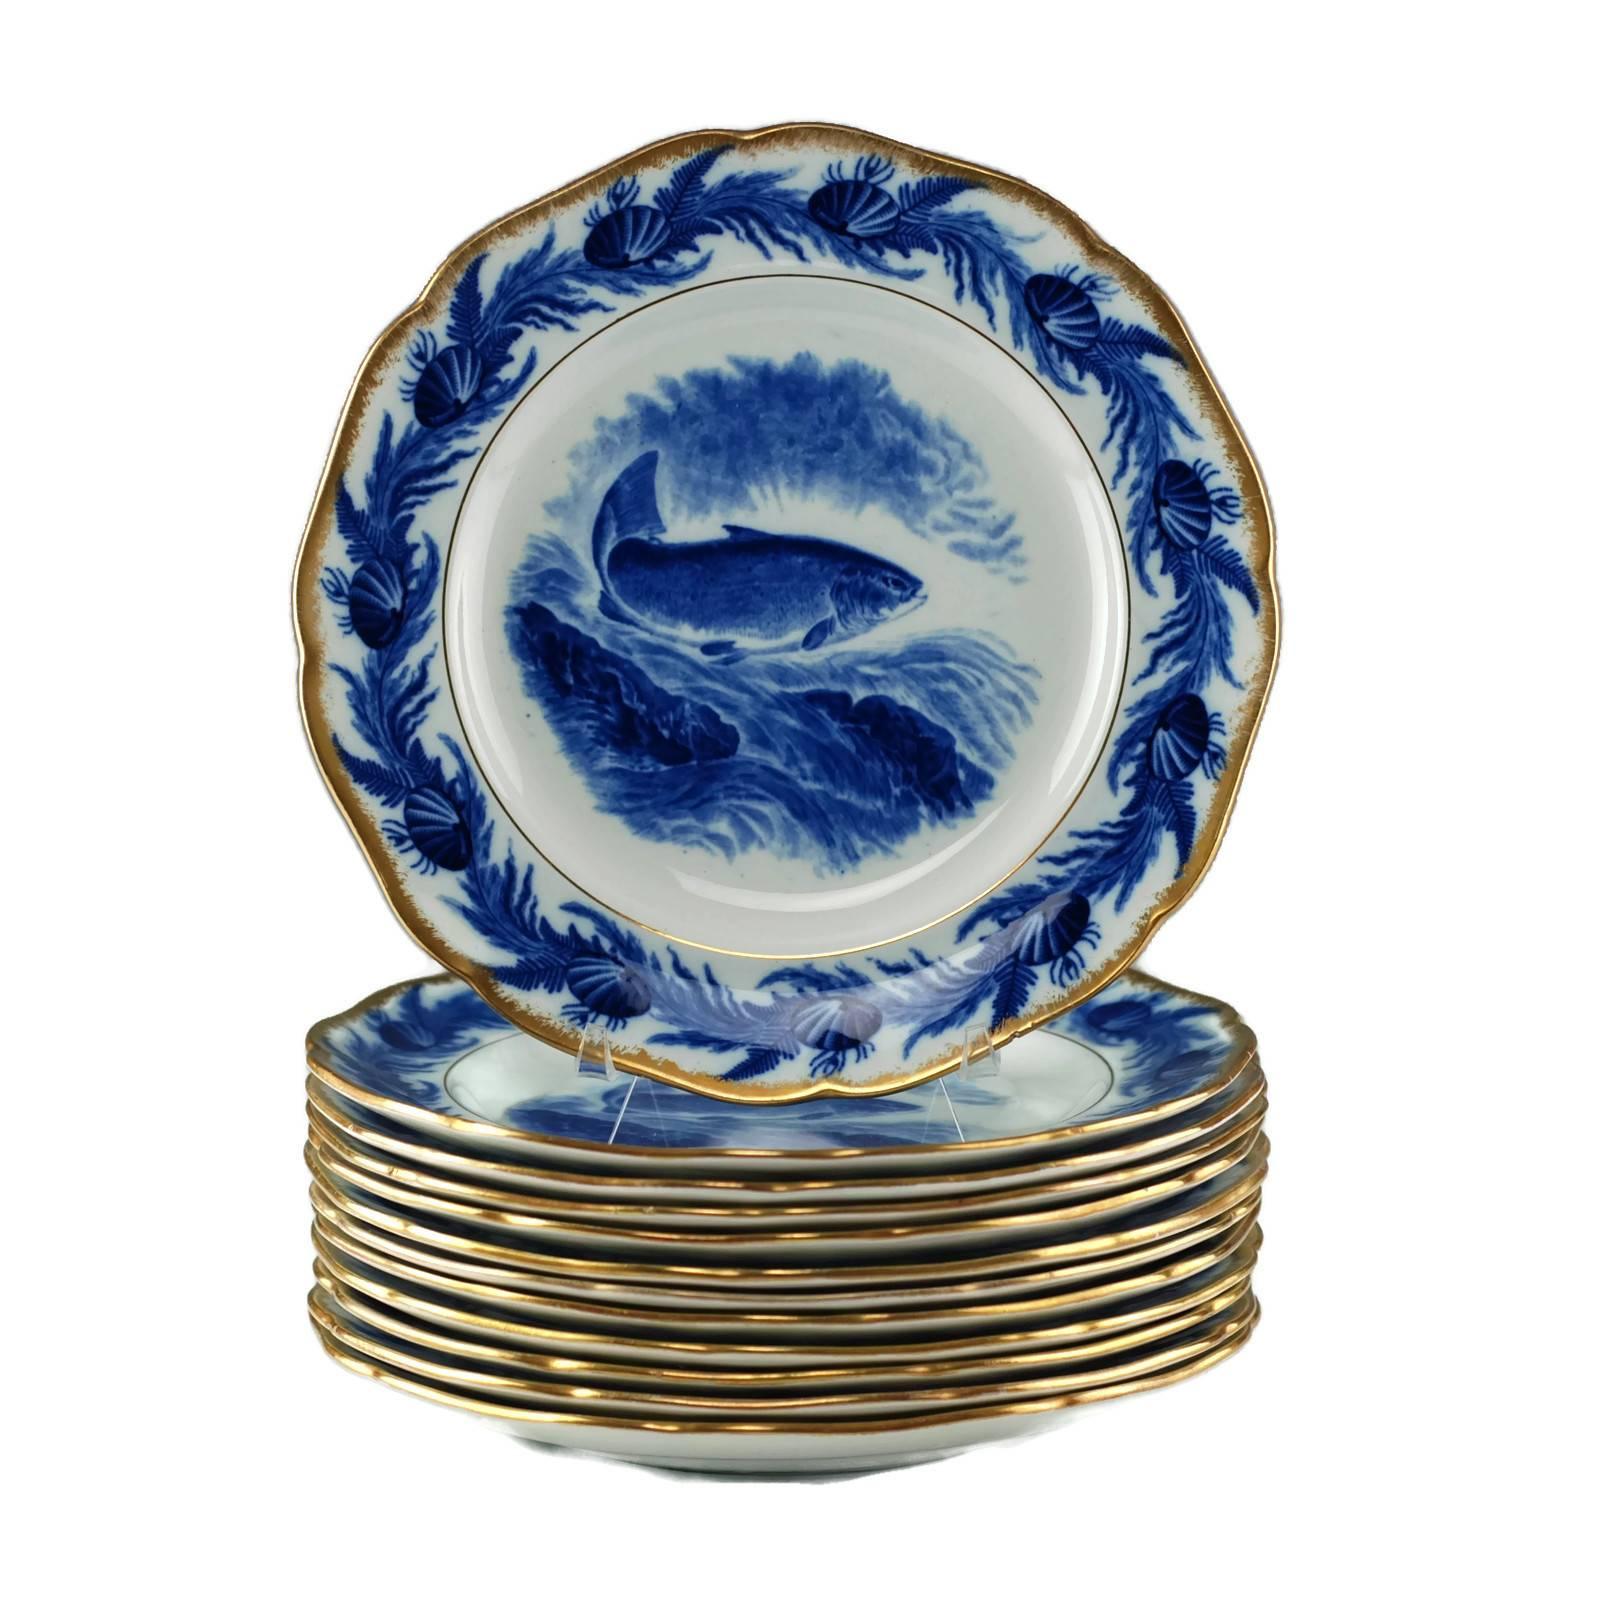 This set of 12 antique Staffordshire flow blue plates was made by Cauldon England and feature the image of a large salmon leaping above the surface of a stream which is cascading over rocks. The central image is encircled within a band of aquatic